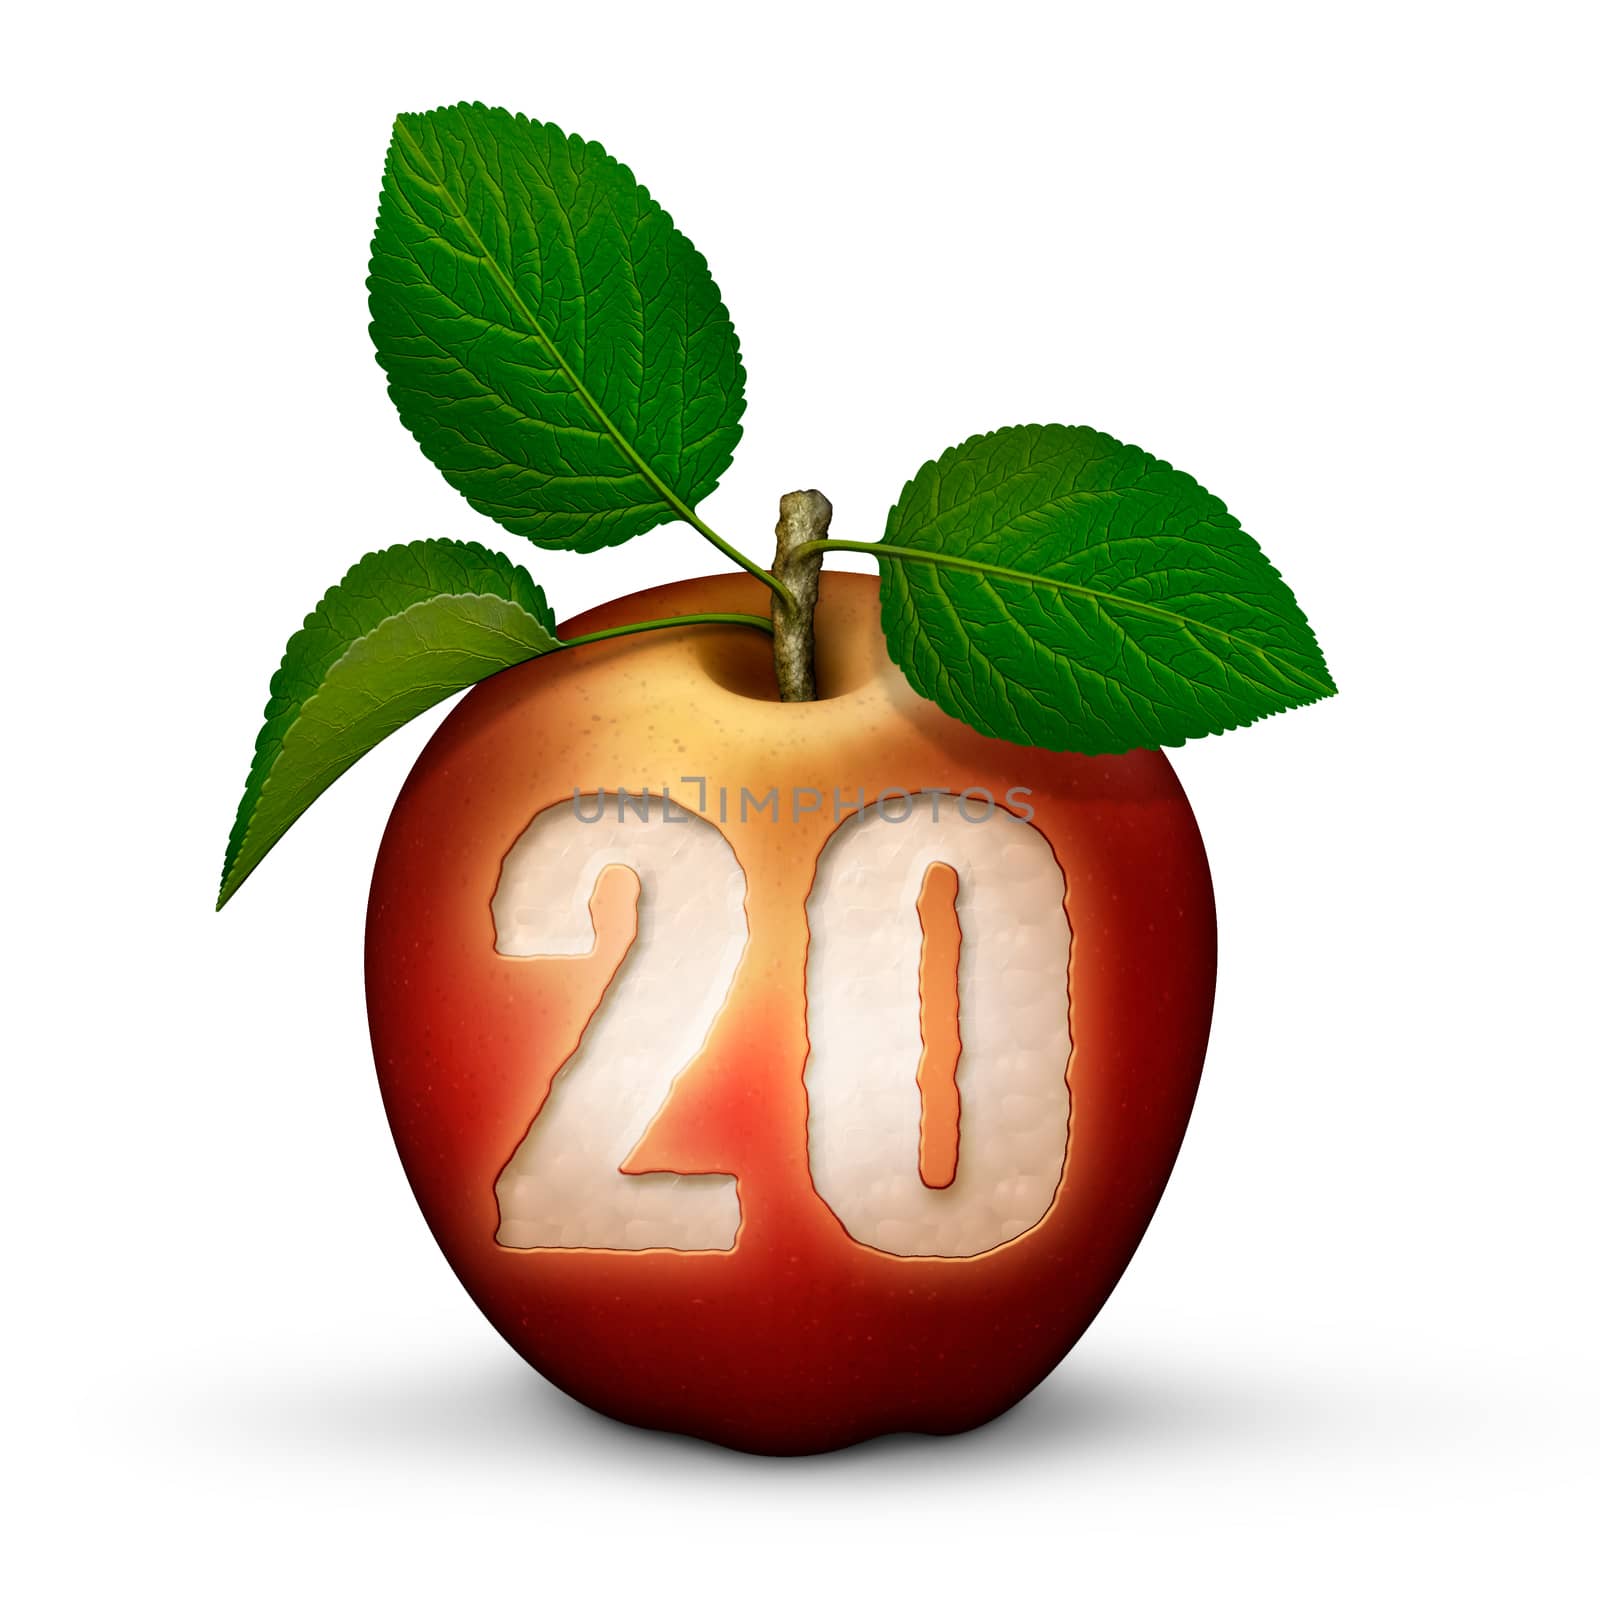 3D illustration of an apple with the number 20 bitten out of it.